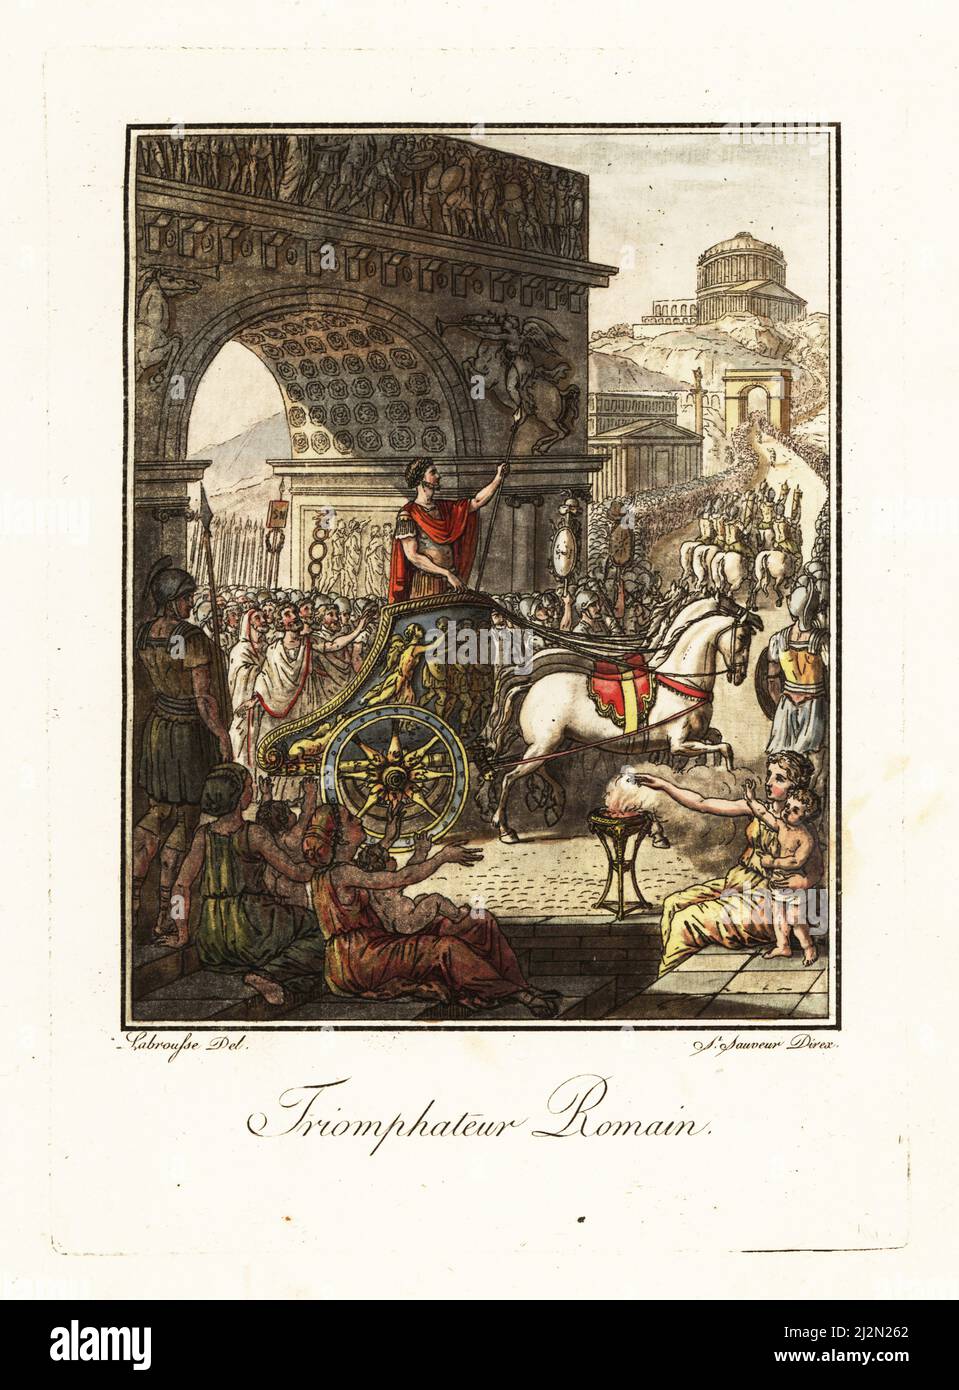 Triumphator receiving a triumph in ancient Rome. A military commander in armour and paludamentum rides a four-horse chariot or quadriga under an arch in front of legionaries with signifers. The parade passes through the city in front of huge crowds. Triomphateur Romain. Handcoloured copperplate drawn and engraved by L. Labrousse, artist of Bordeaux, under the direction of Jacques Grasset de Saint-Sauveur from his L’antique Rome, ou description historique et pittoresque, Ancient Rome, or historical and picturesque description, Chez Deroy, Paris, 1796. Stock Photo